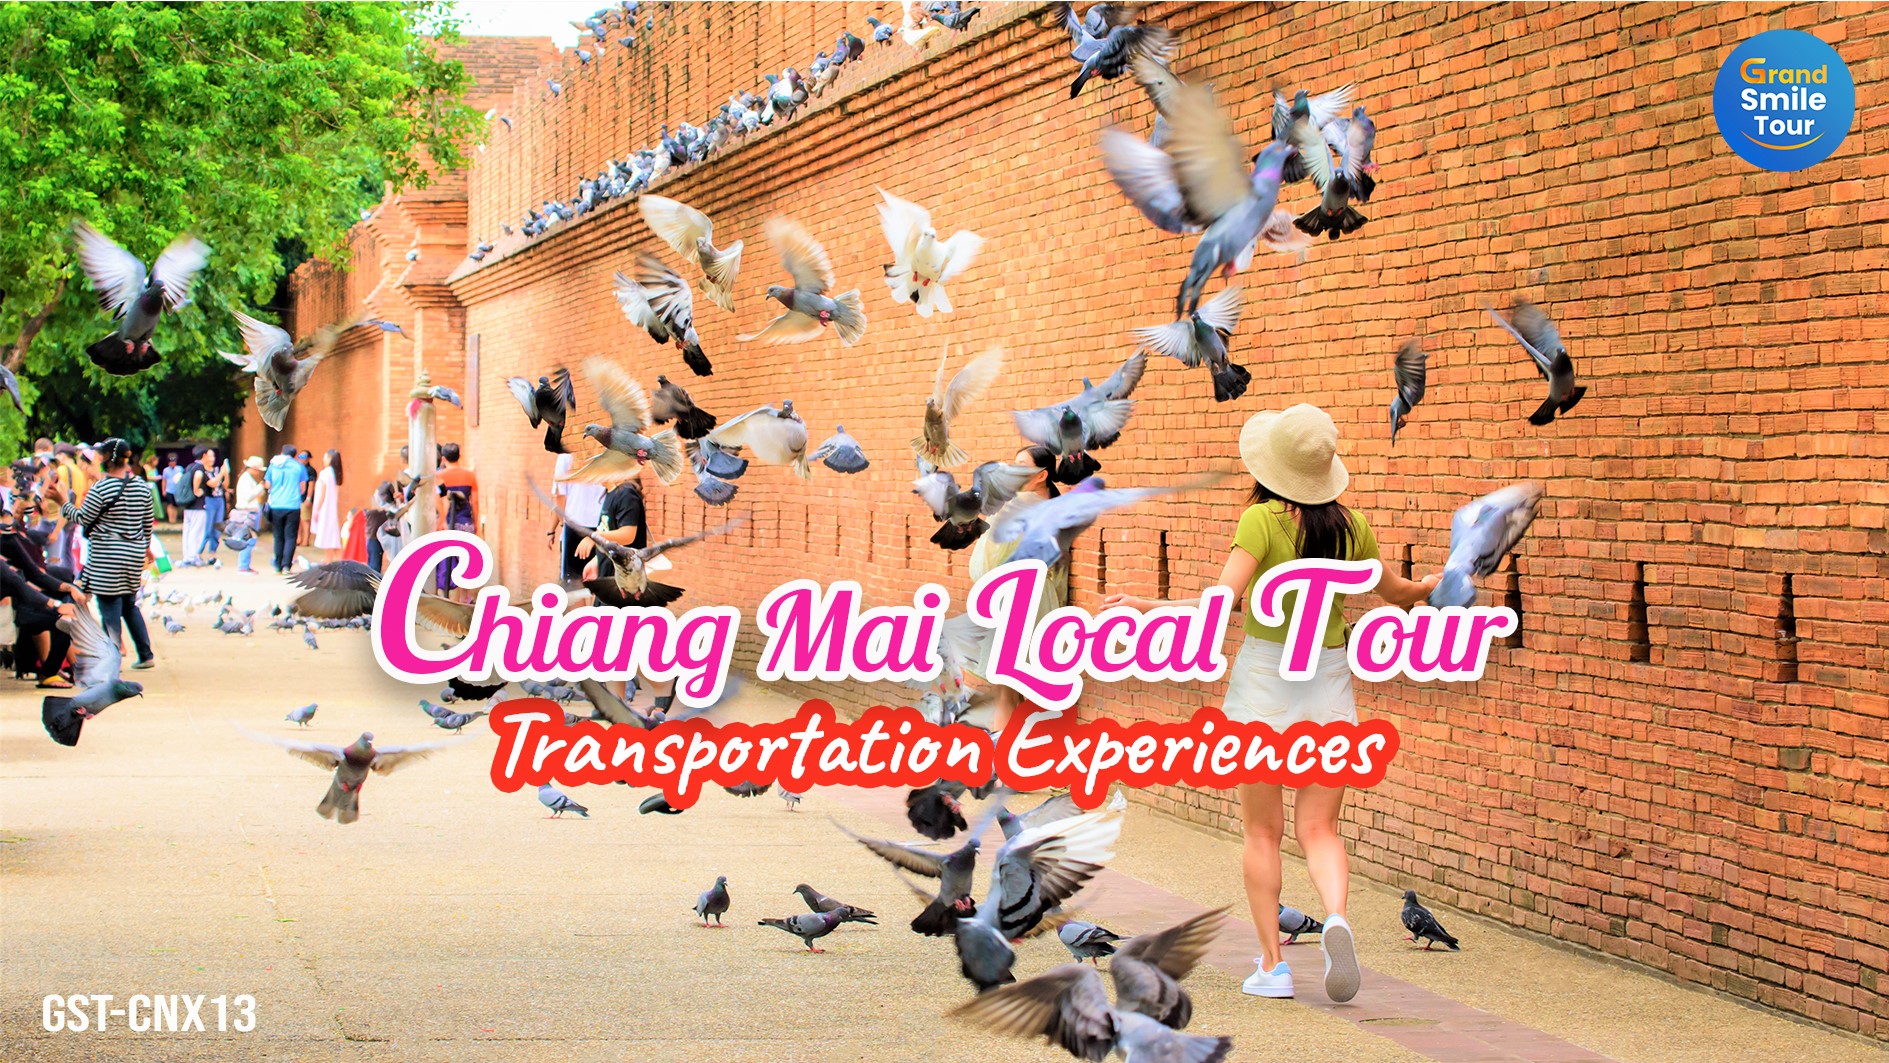 GST-CNX13 One Day Tour - Chiang Mai Local Tour Transportation Experiences